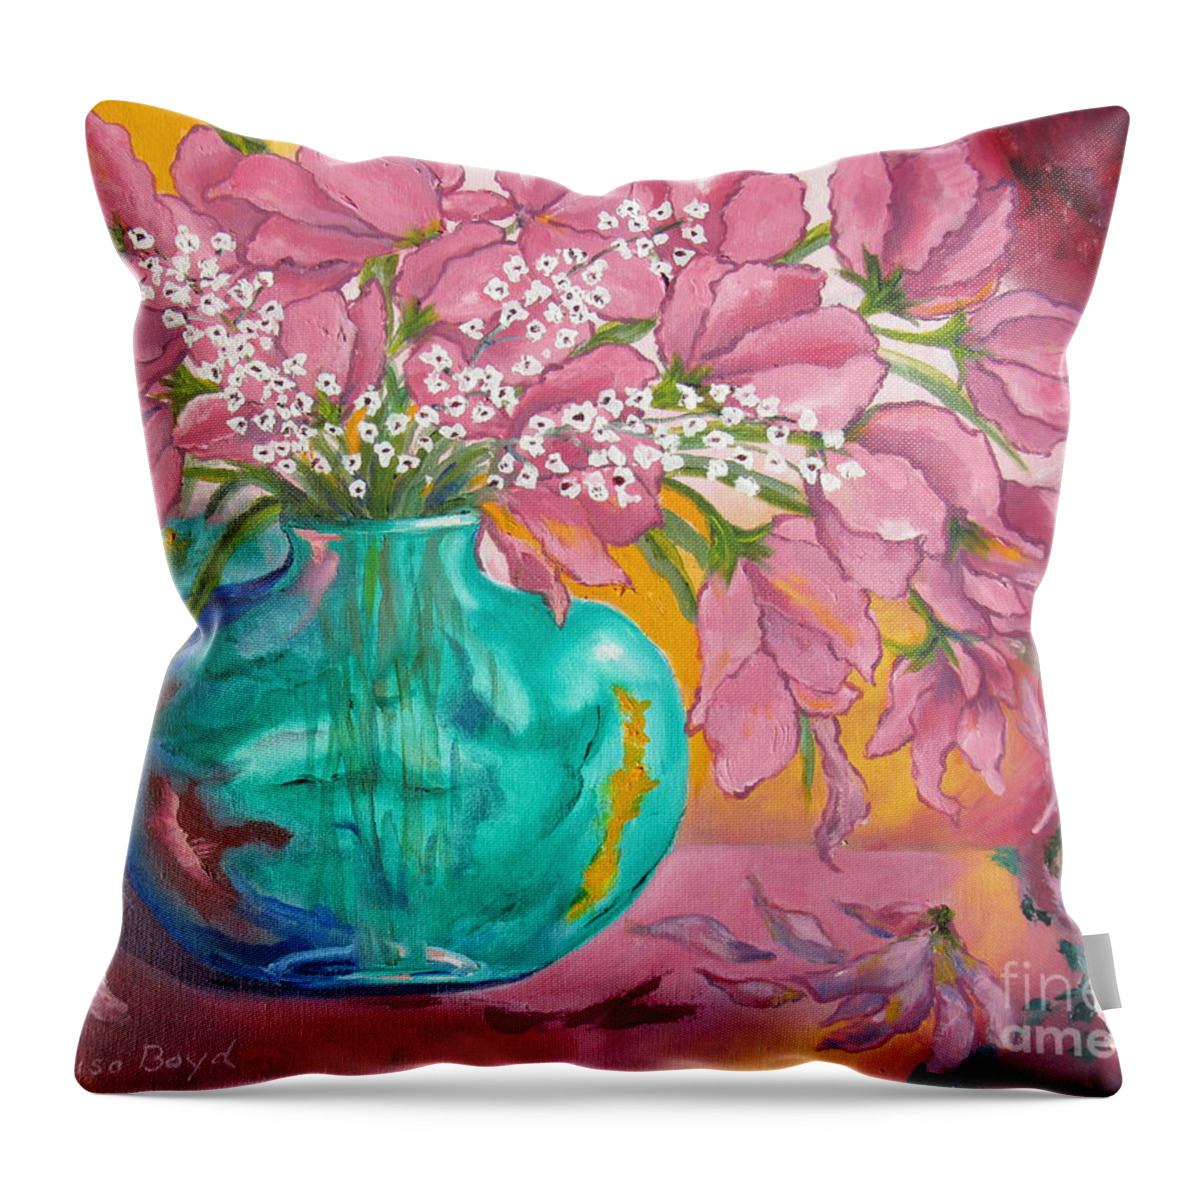 Floral Throw Pillow featuring the painting Shower of Pink by Lisa Boyd